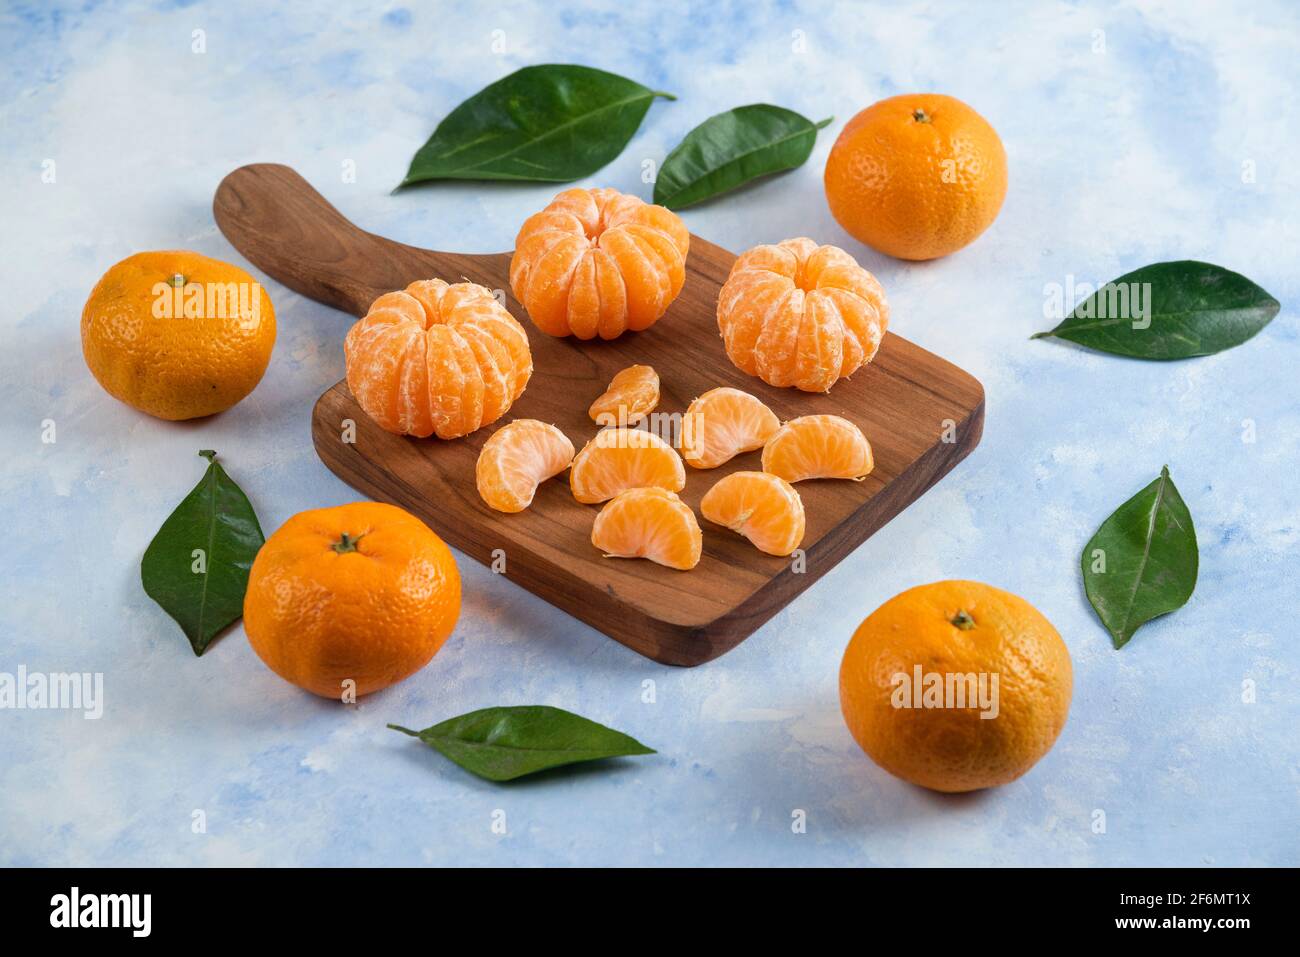 Whole and peeled slice of clementine mandarins. Over wooden board Stock Photo